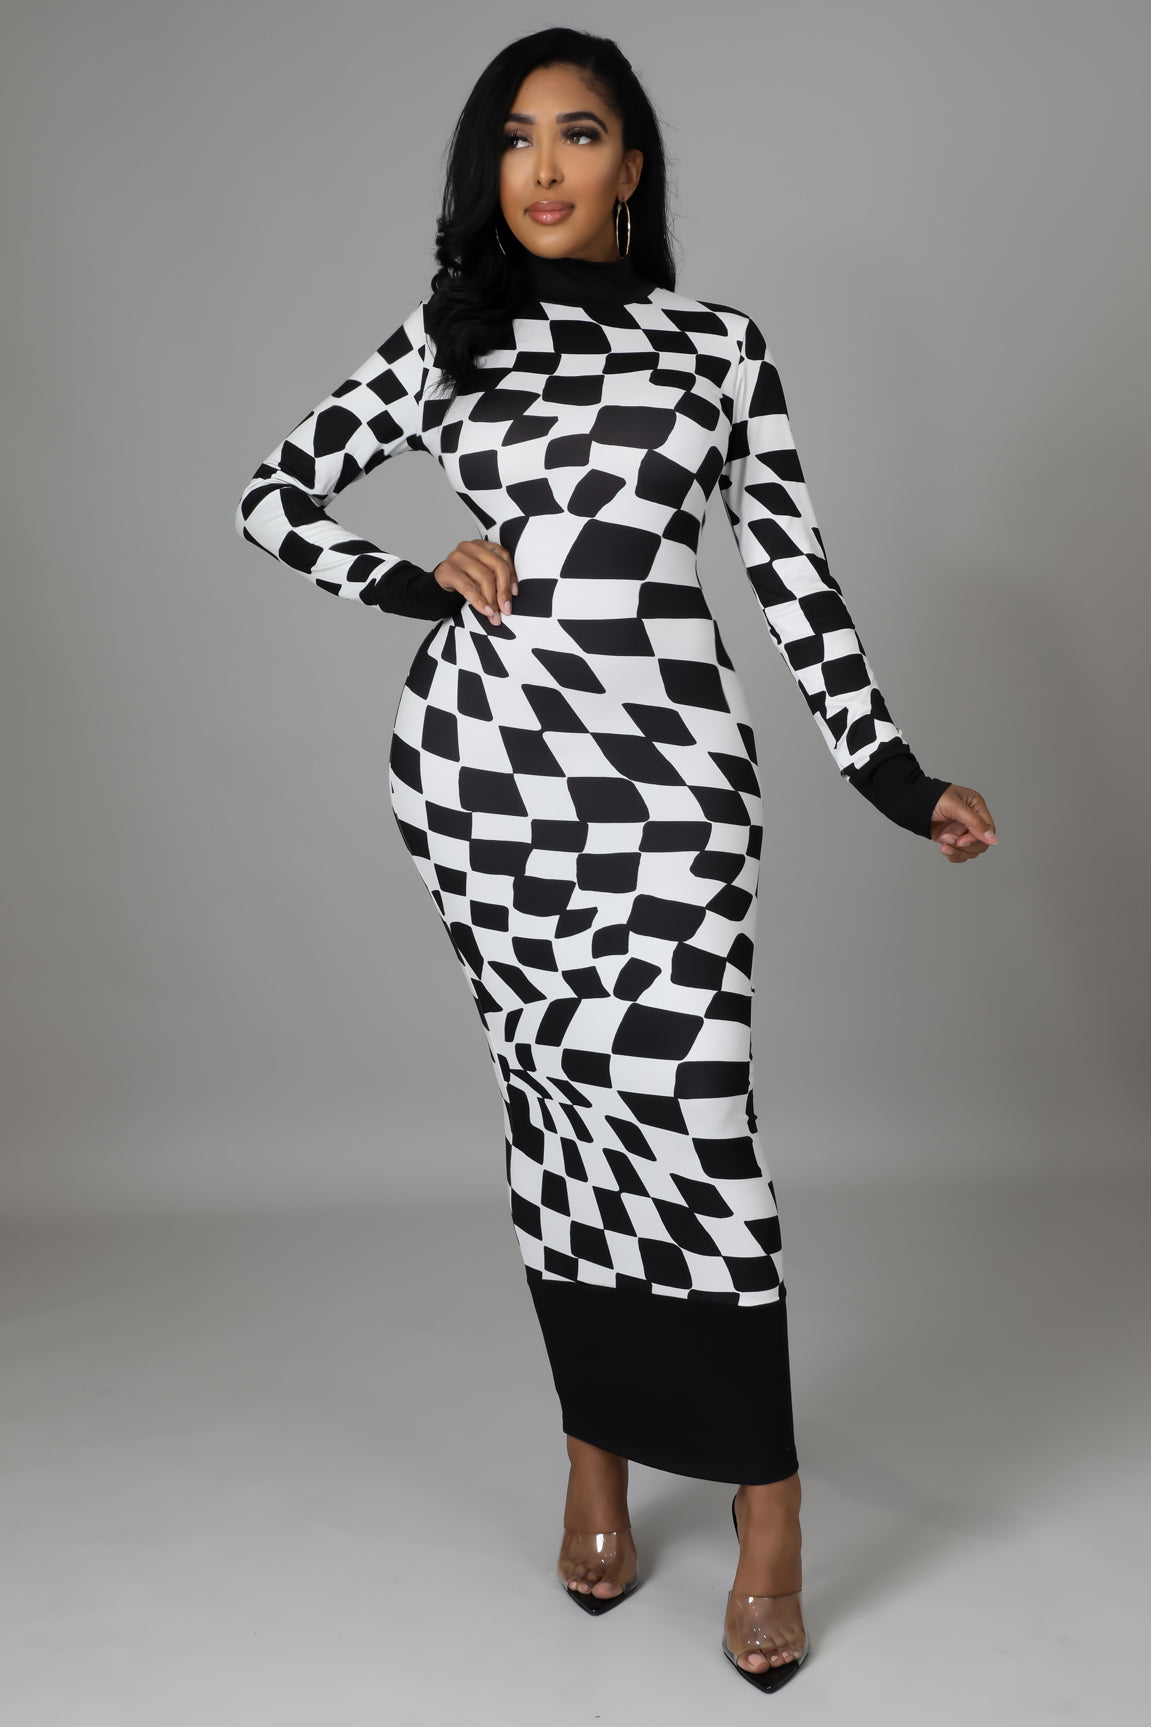 Checkers not Chess Bodycon Dress